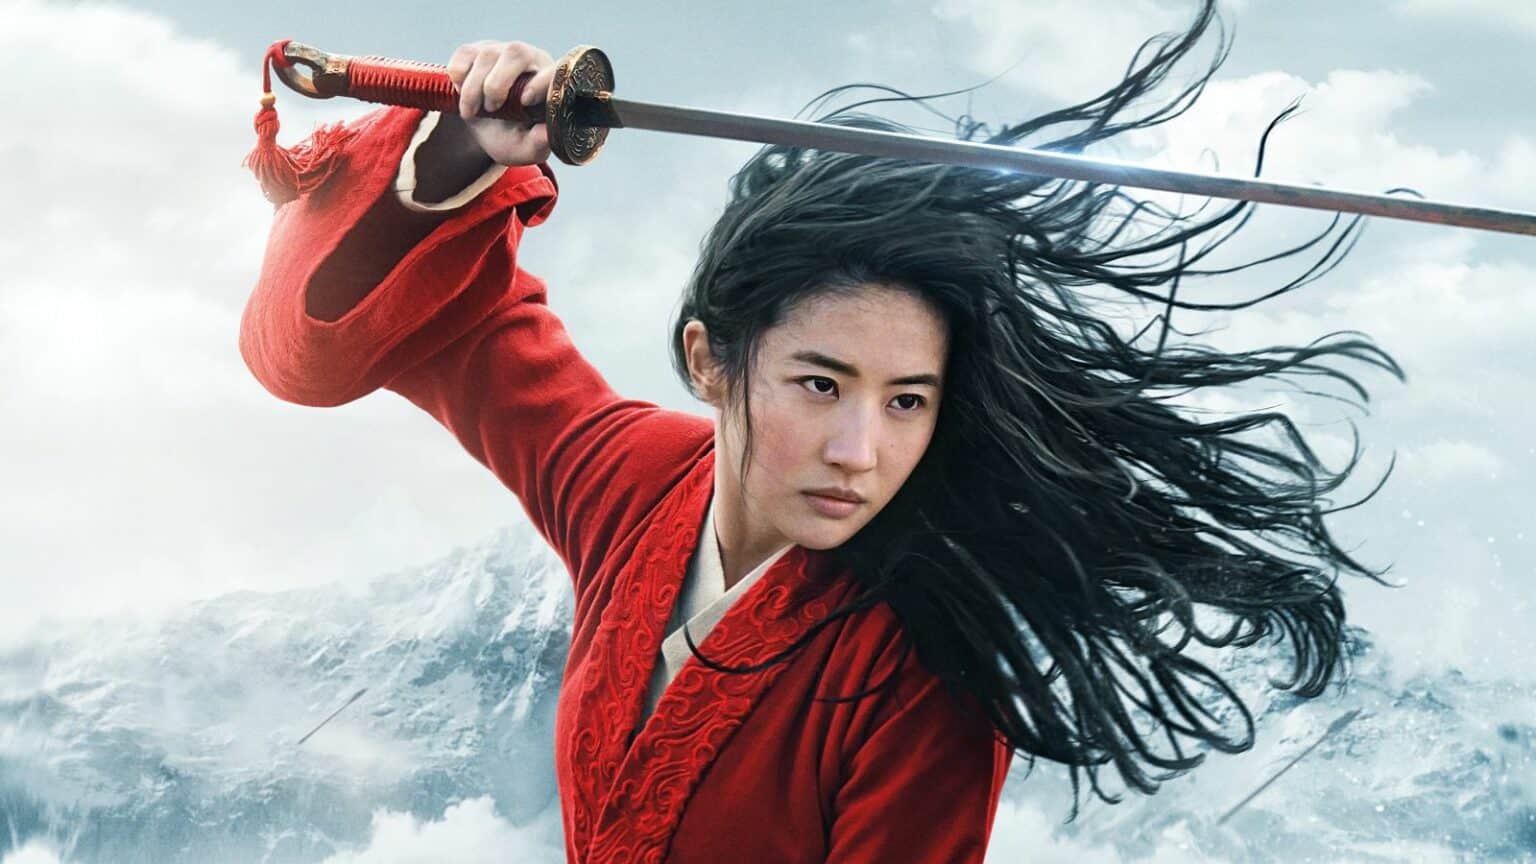 Mulan to be released on Disney+